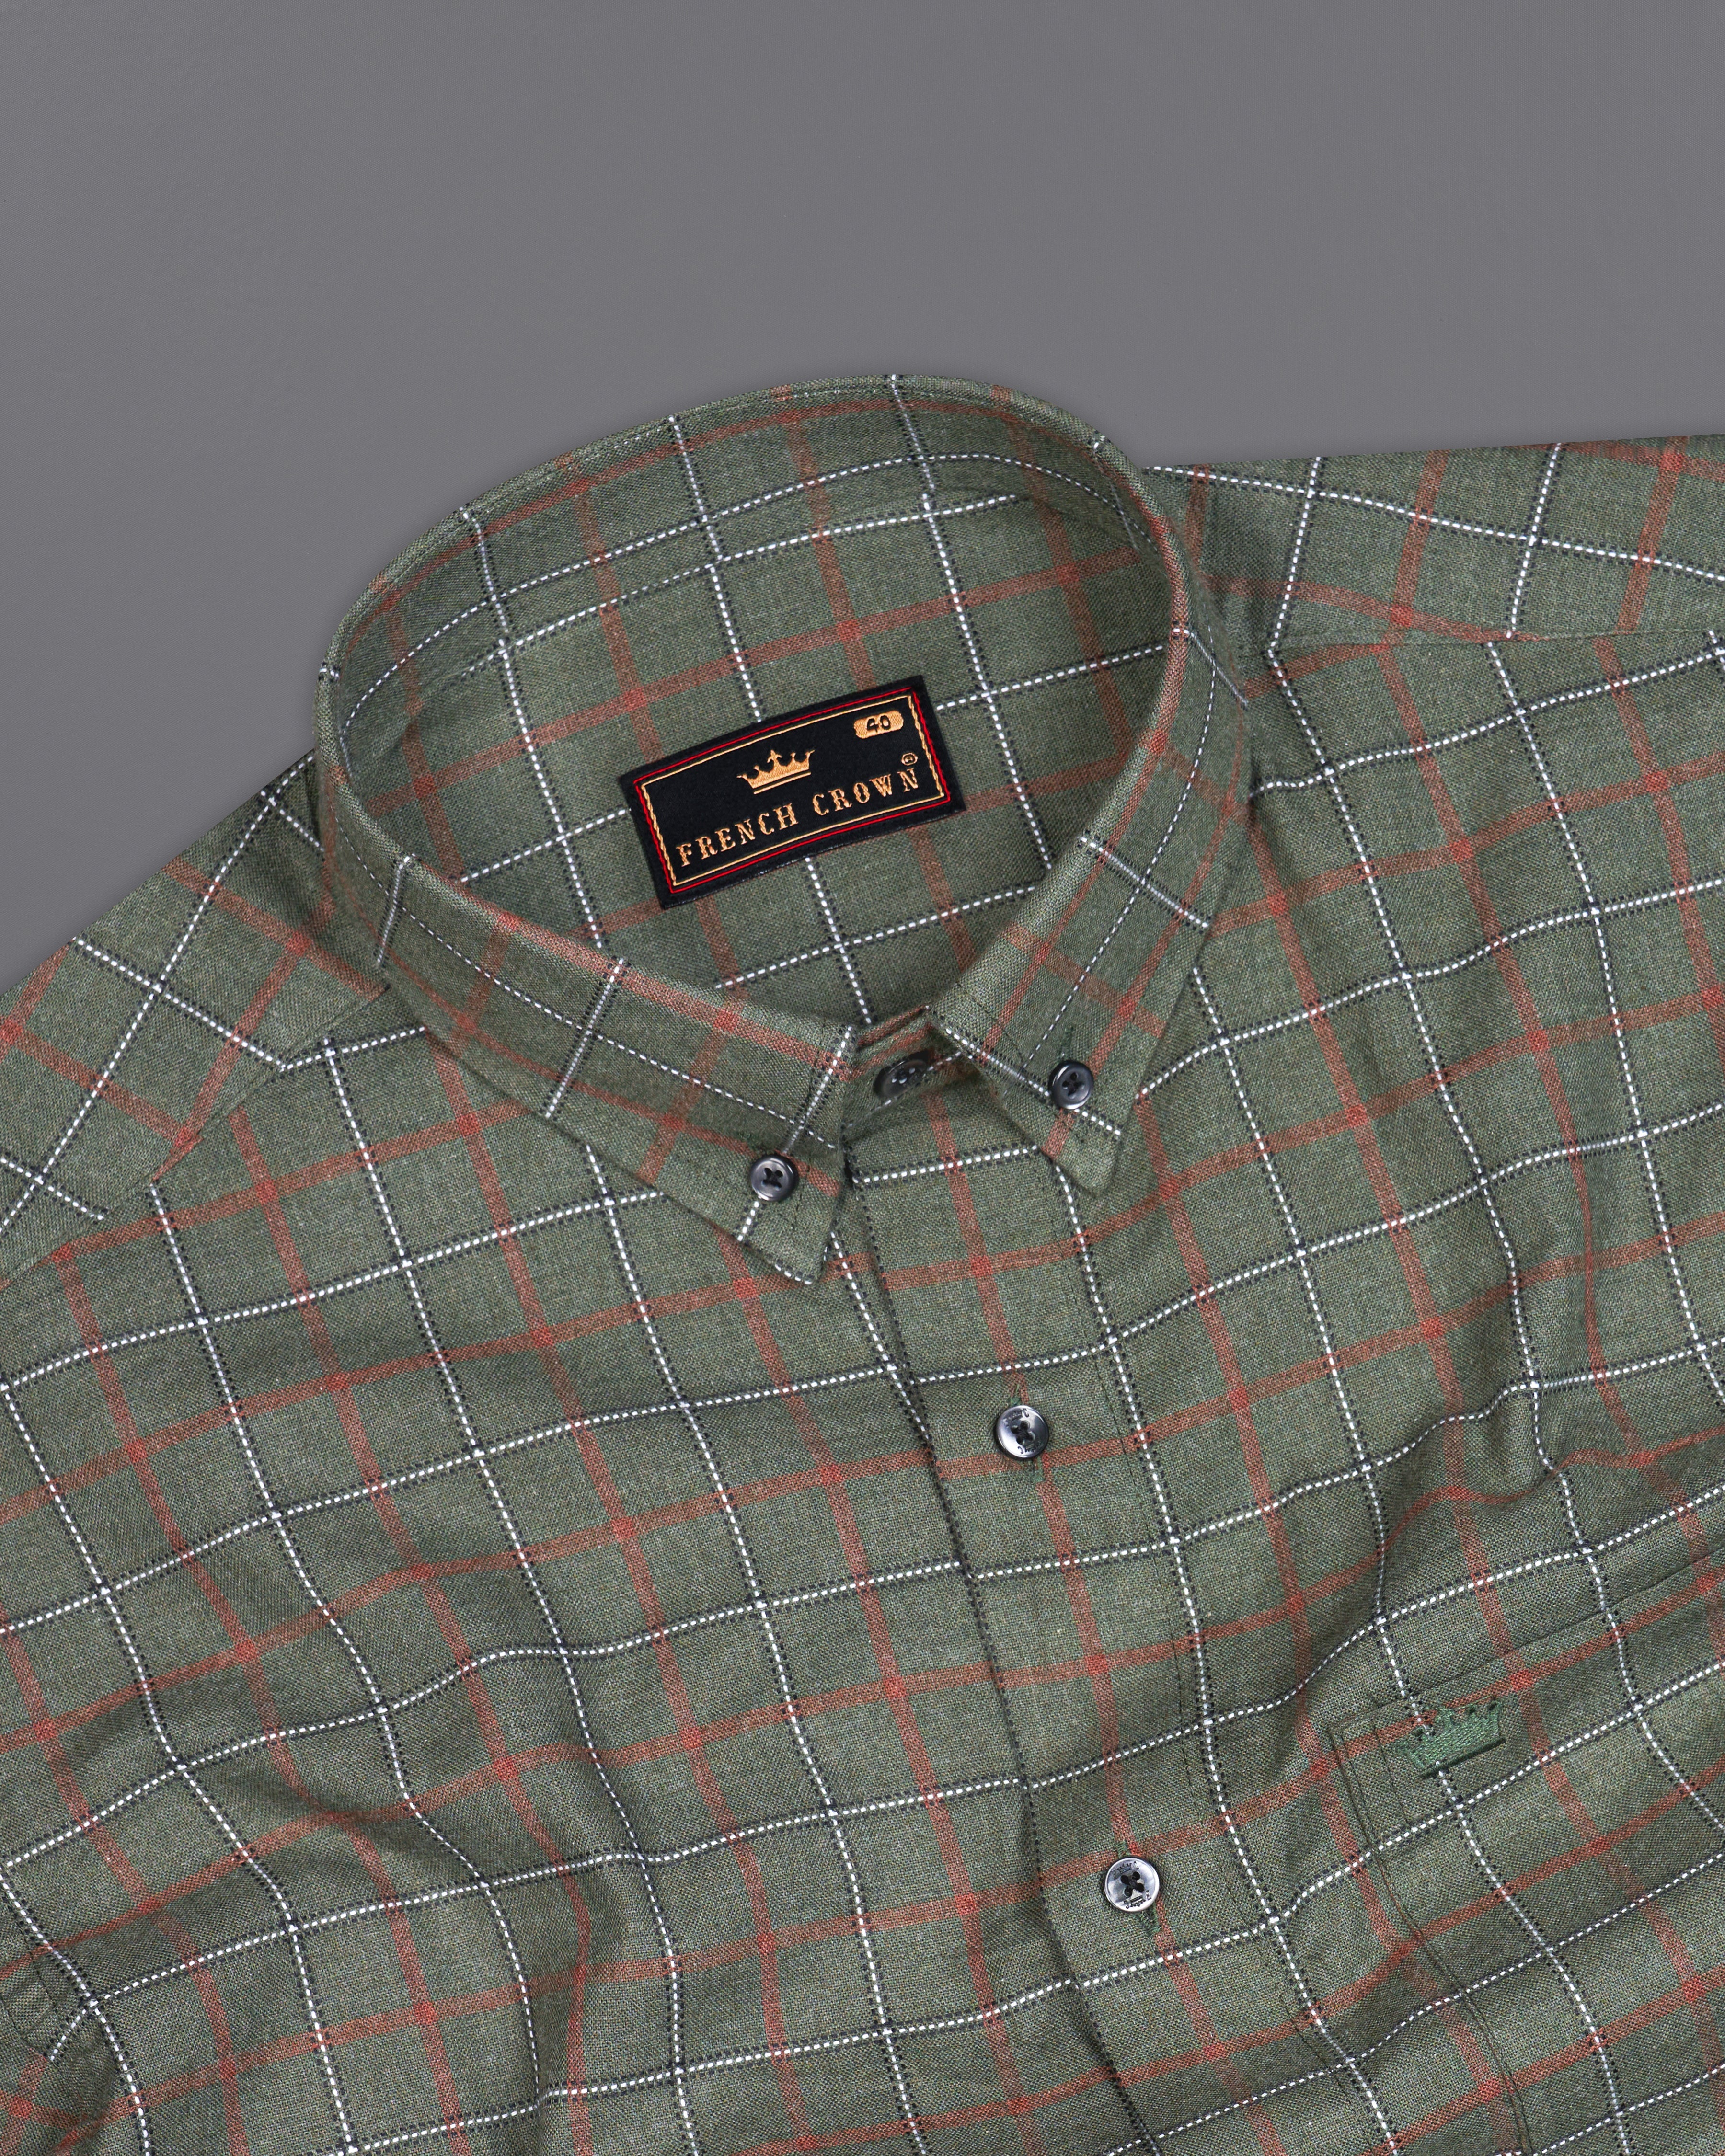 Asparagus Green with Chestnut Brown Checkered with Comical Dog Printed Super Soft Premium Cotton Designer Shirt